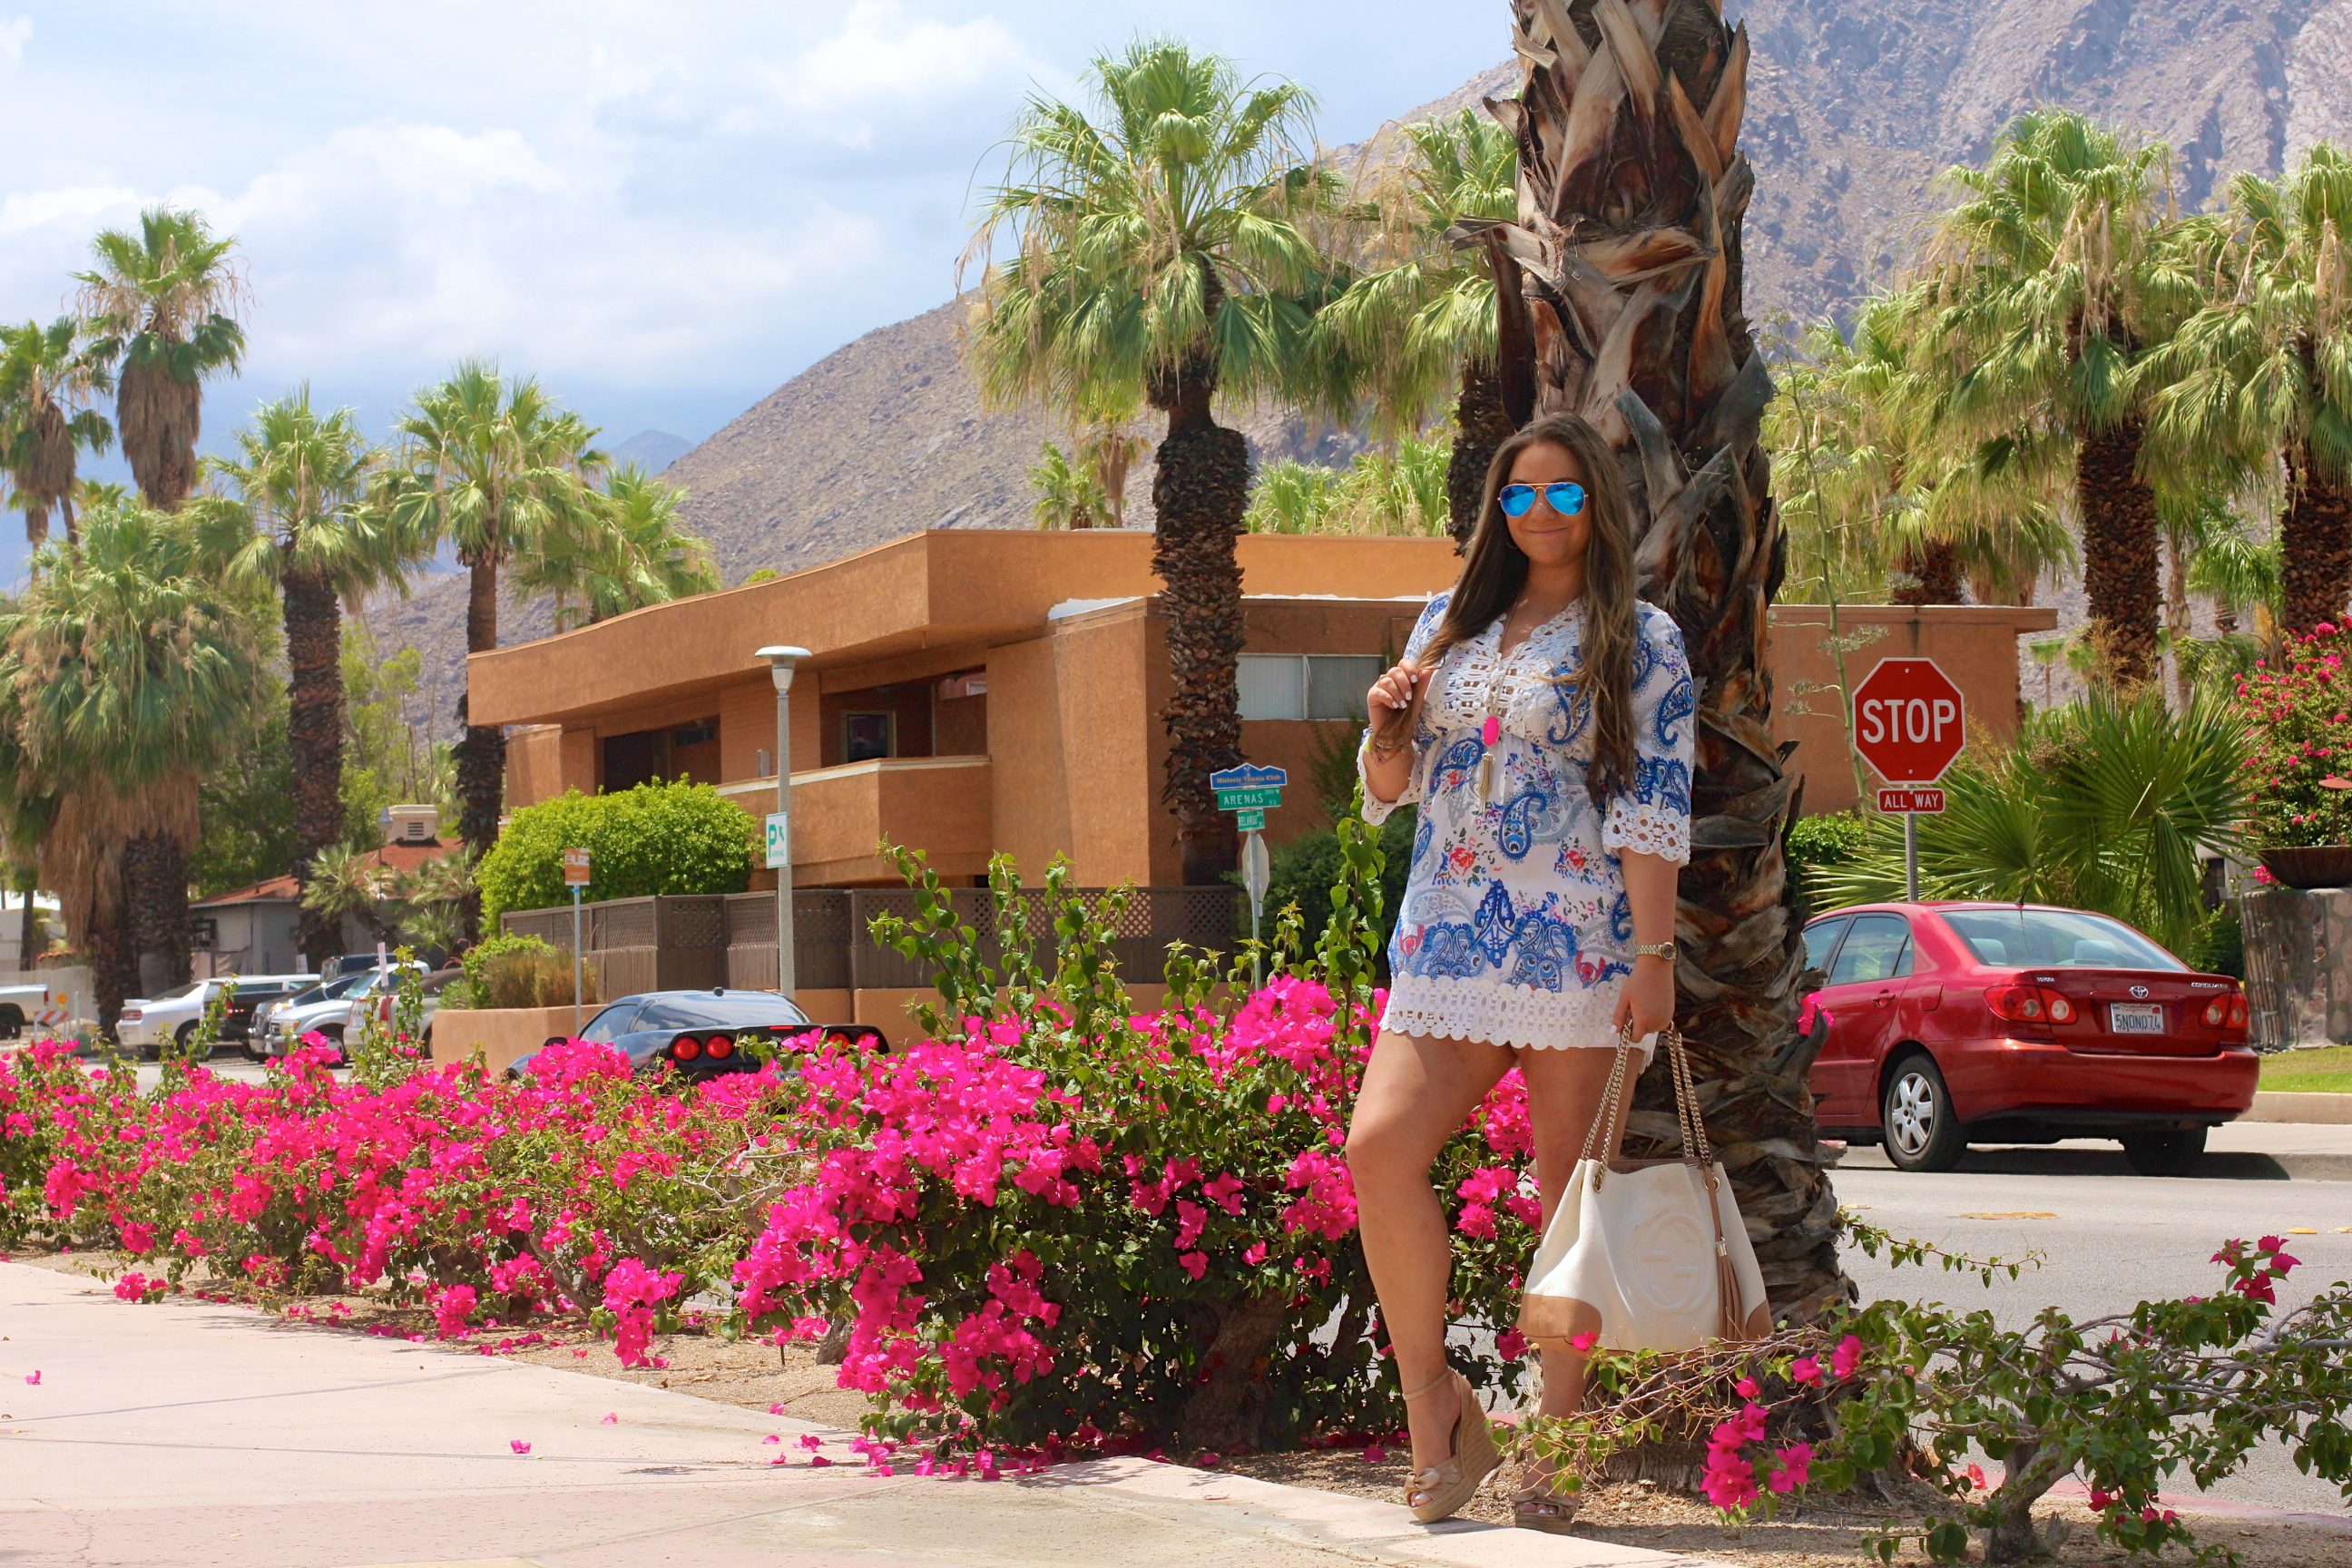 missyonmadison, melissa tierney, fashion blogger, palm springs, choies, paisley dress, gucci bag, gucci, gucci soho tote, espadrille wedges, nude espadrille wedges, ray bans, blue aviators, kendra scott necklace, la blogger blogger, tbt, style blogger, 